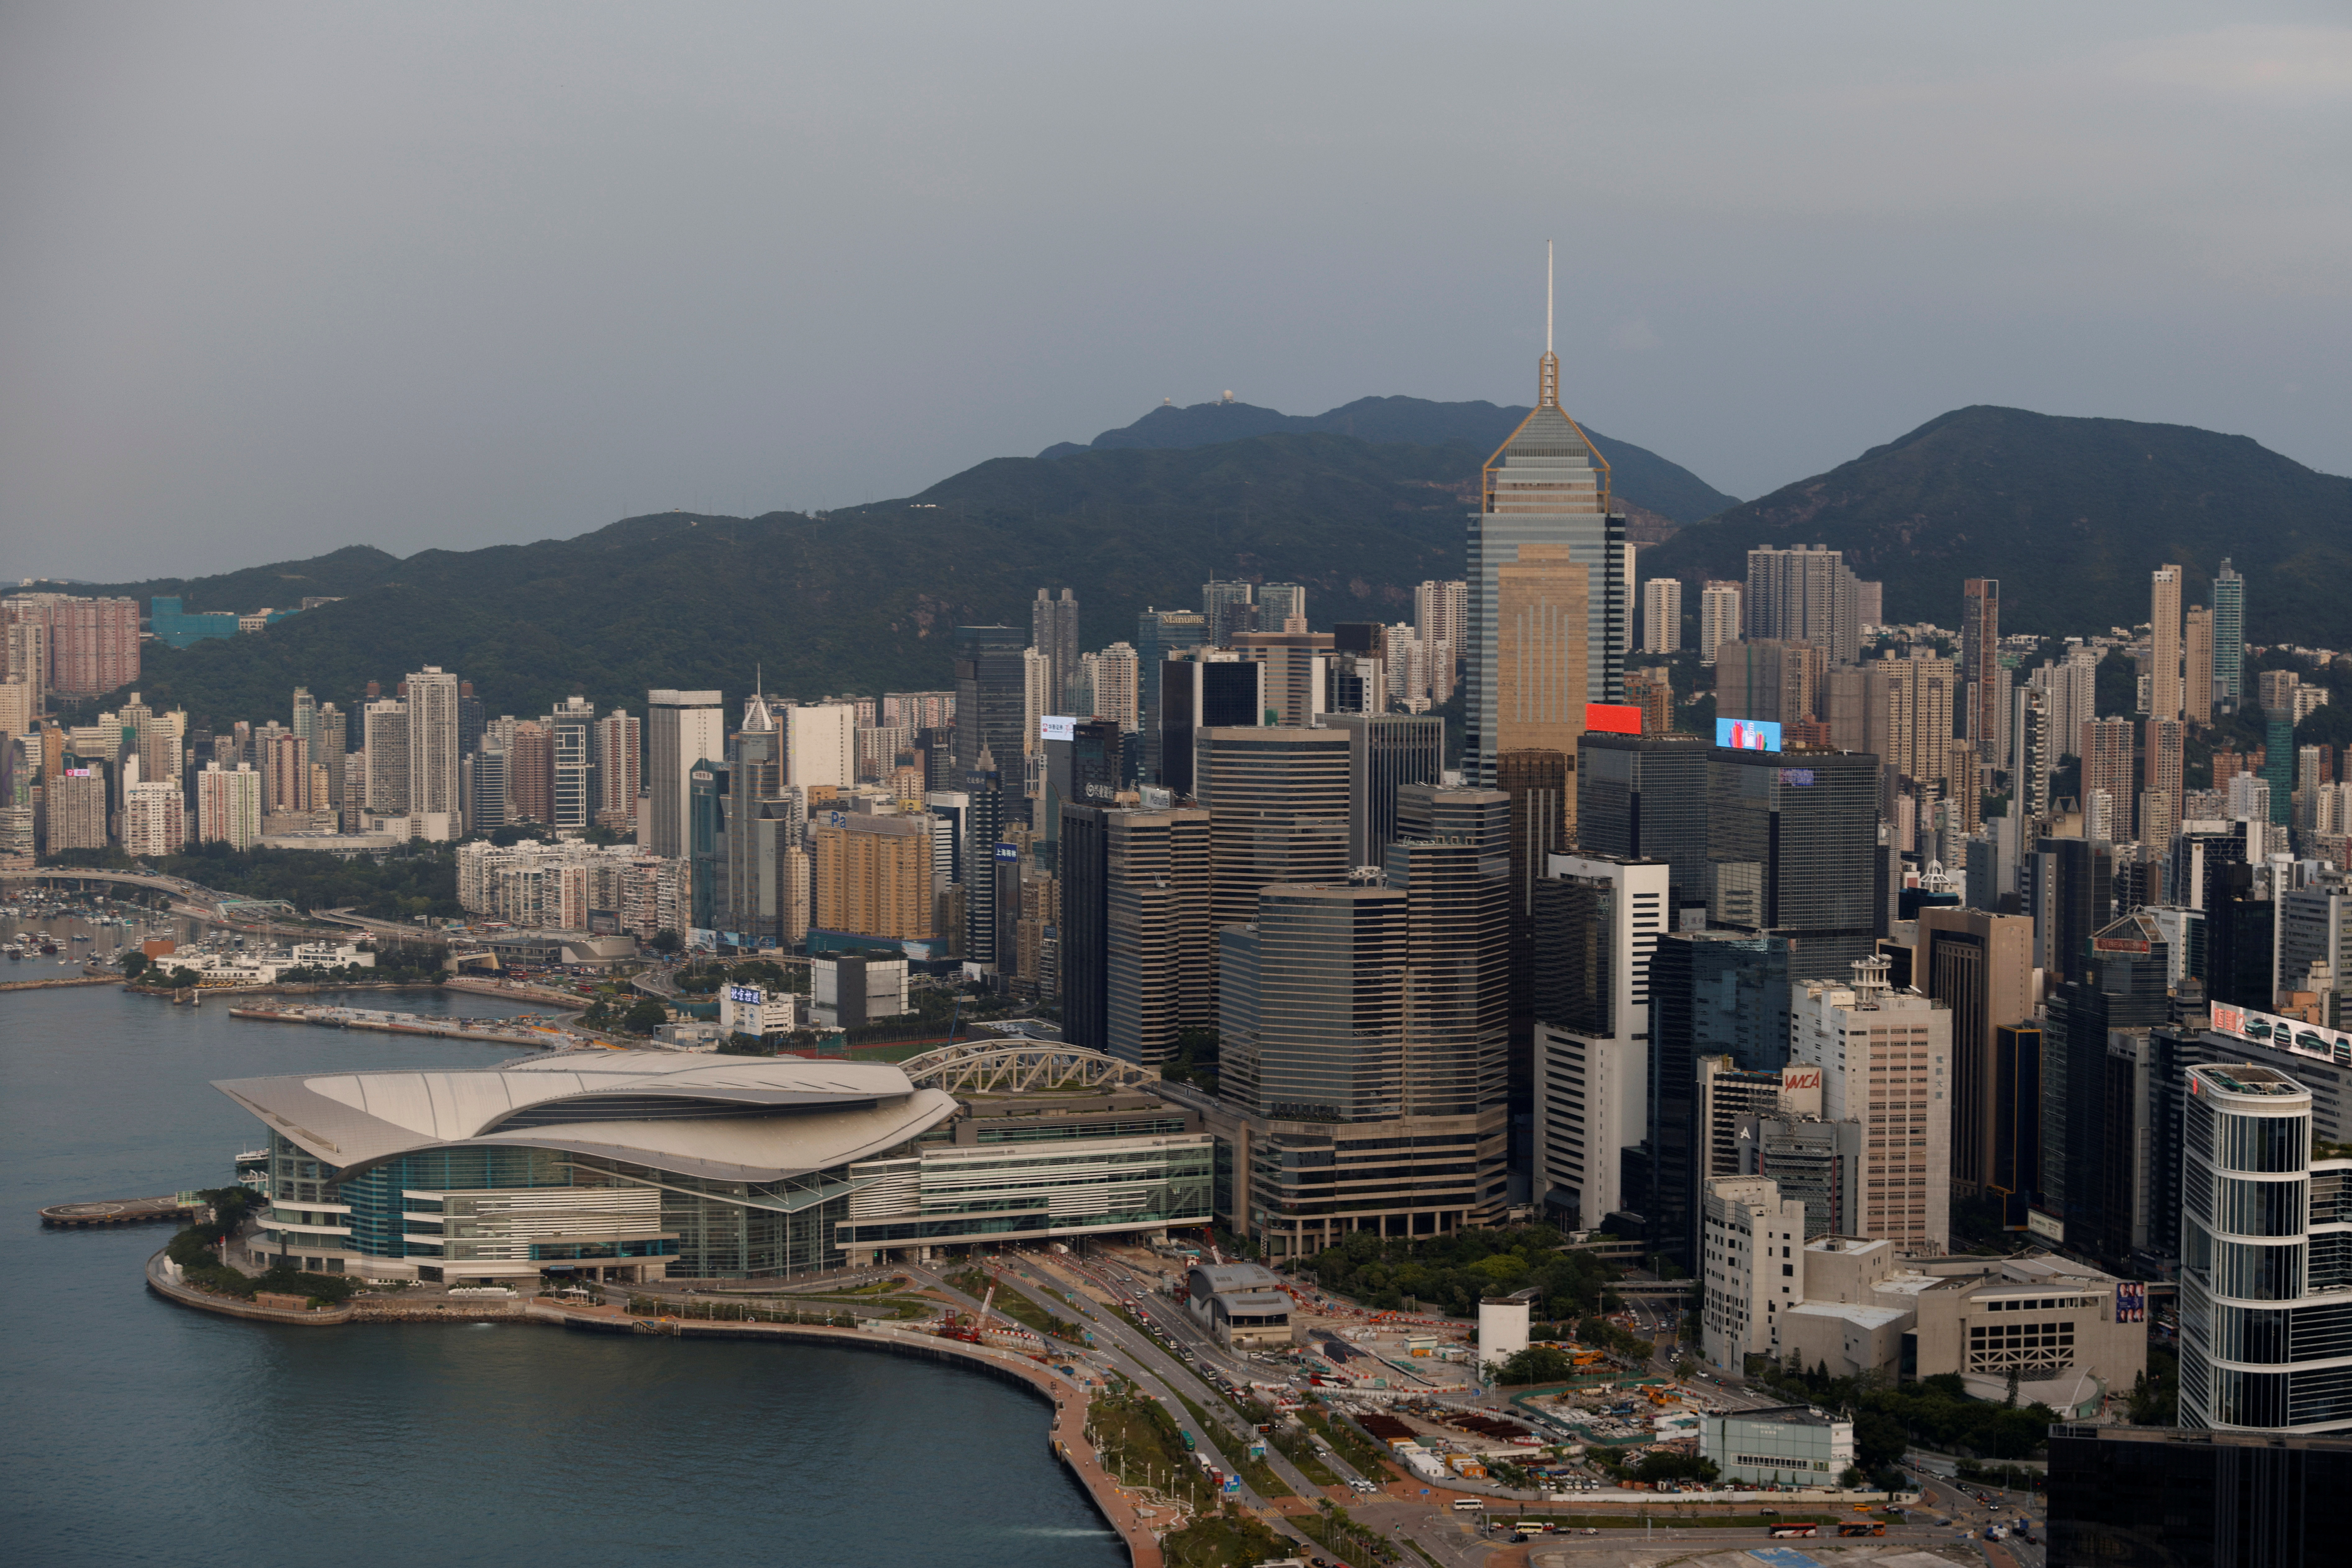 A general view showing the Central Business District in Hong Kong